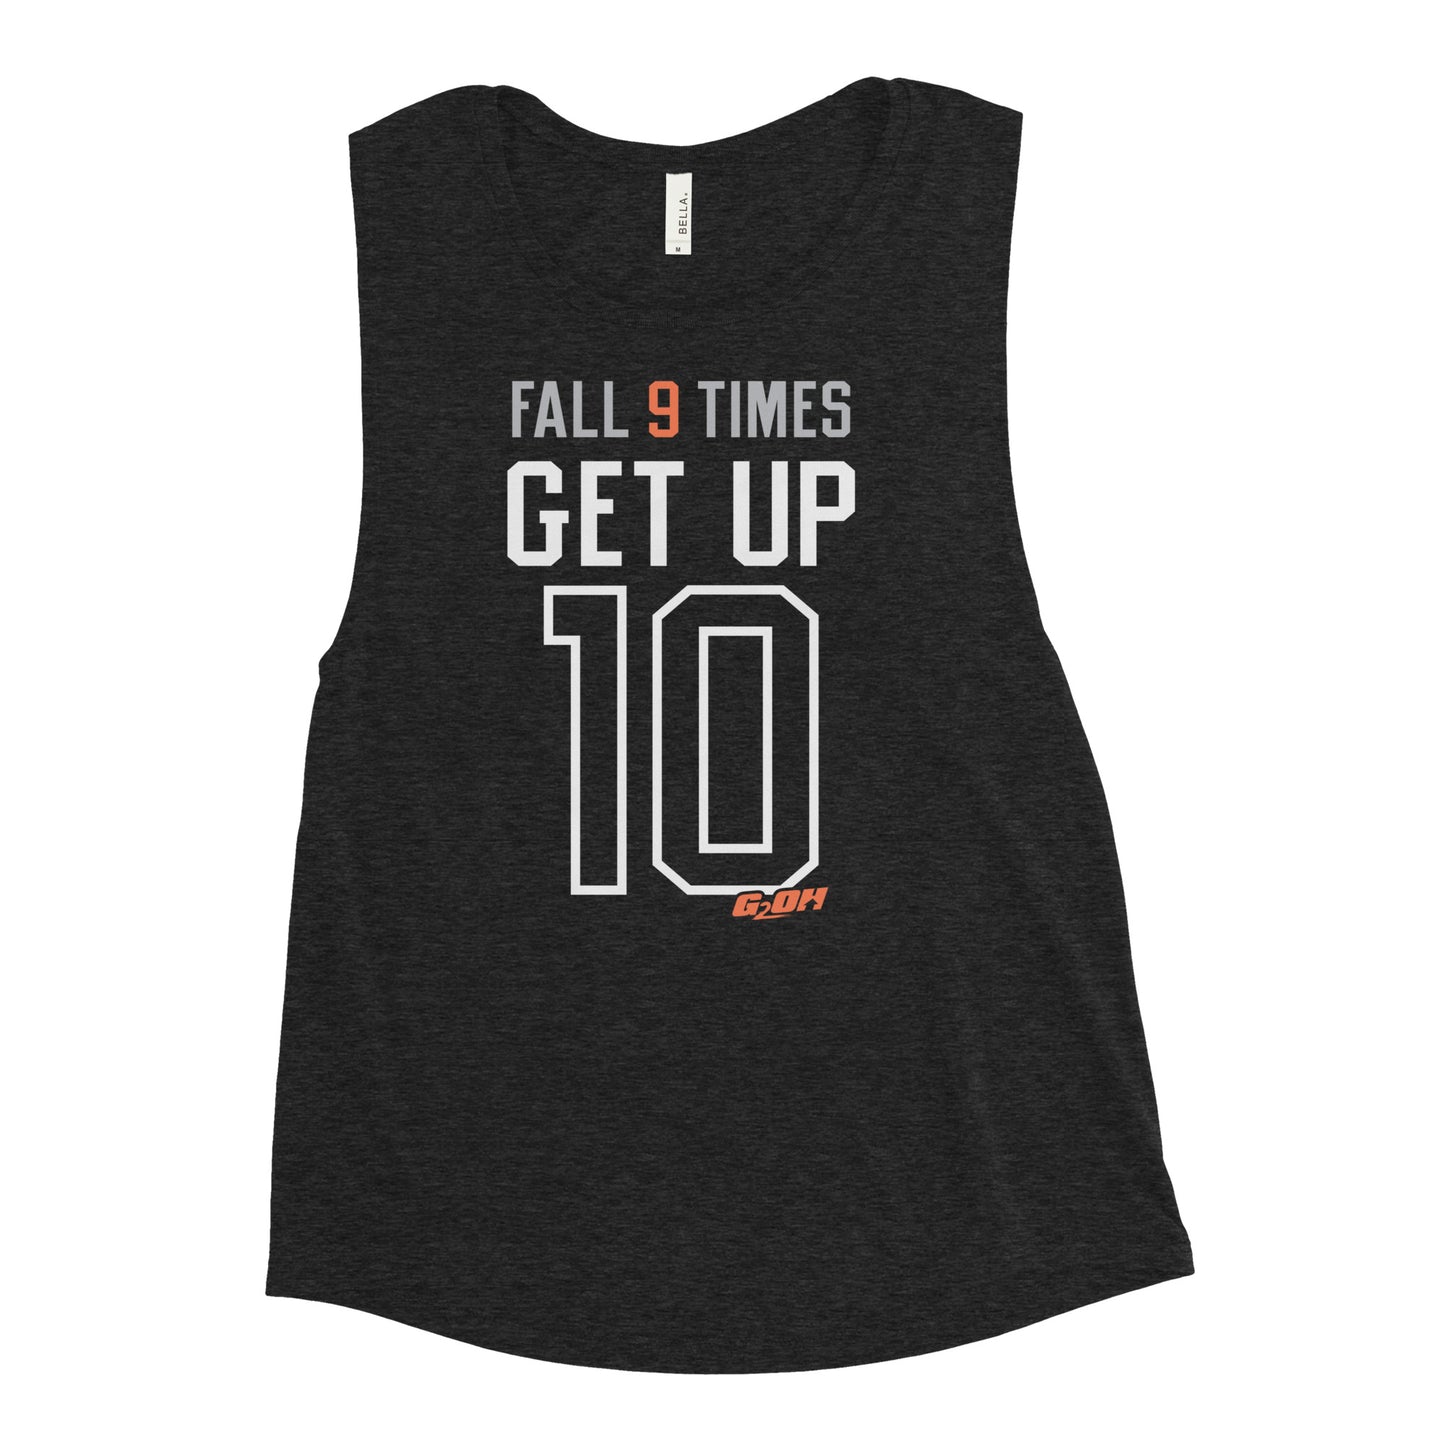 Fall 9 Times, Get Up 10 Women's Muscle Tank